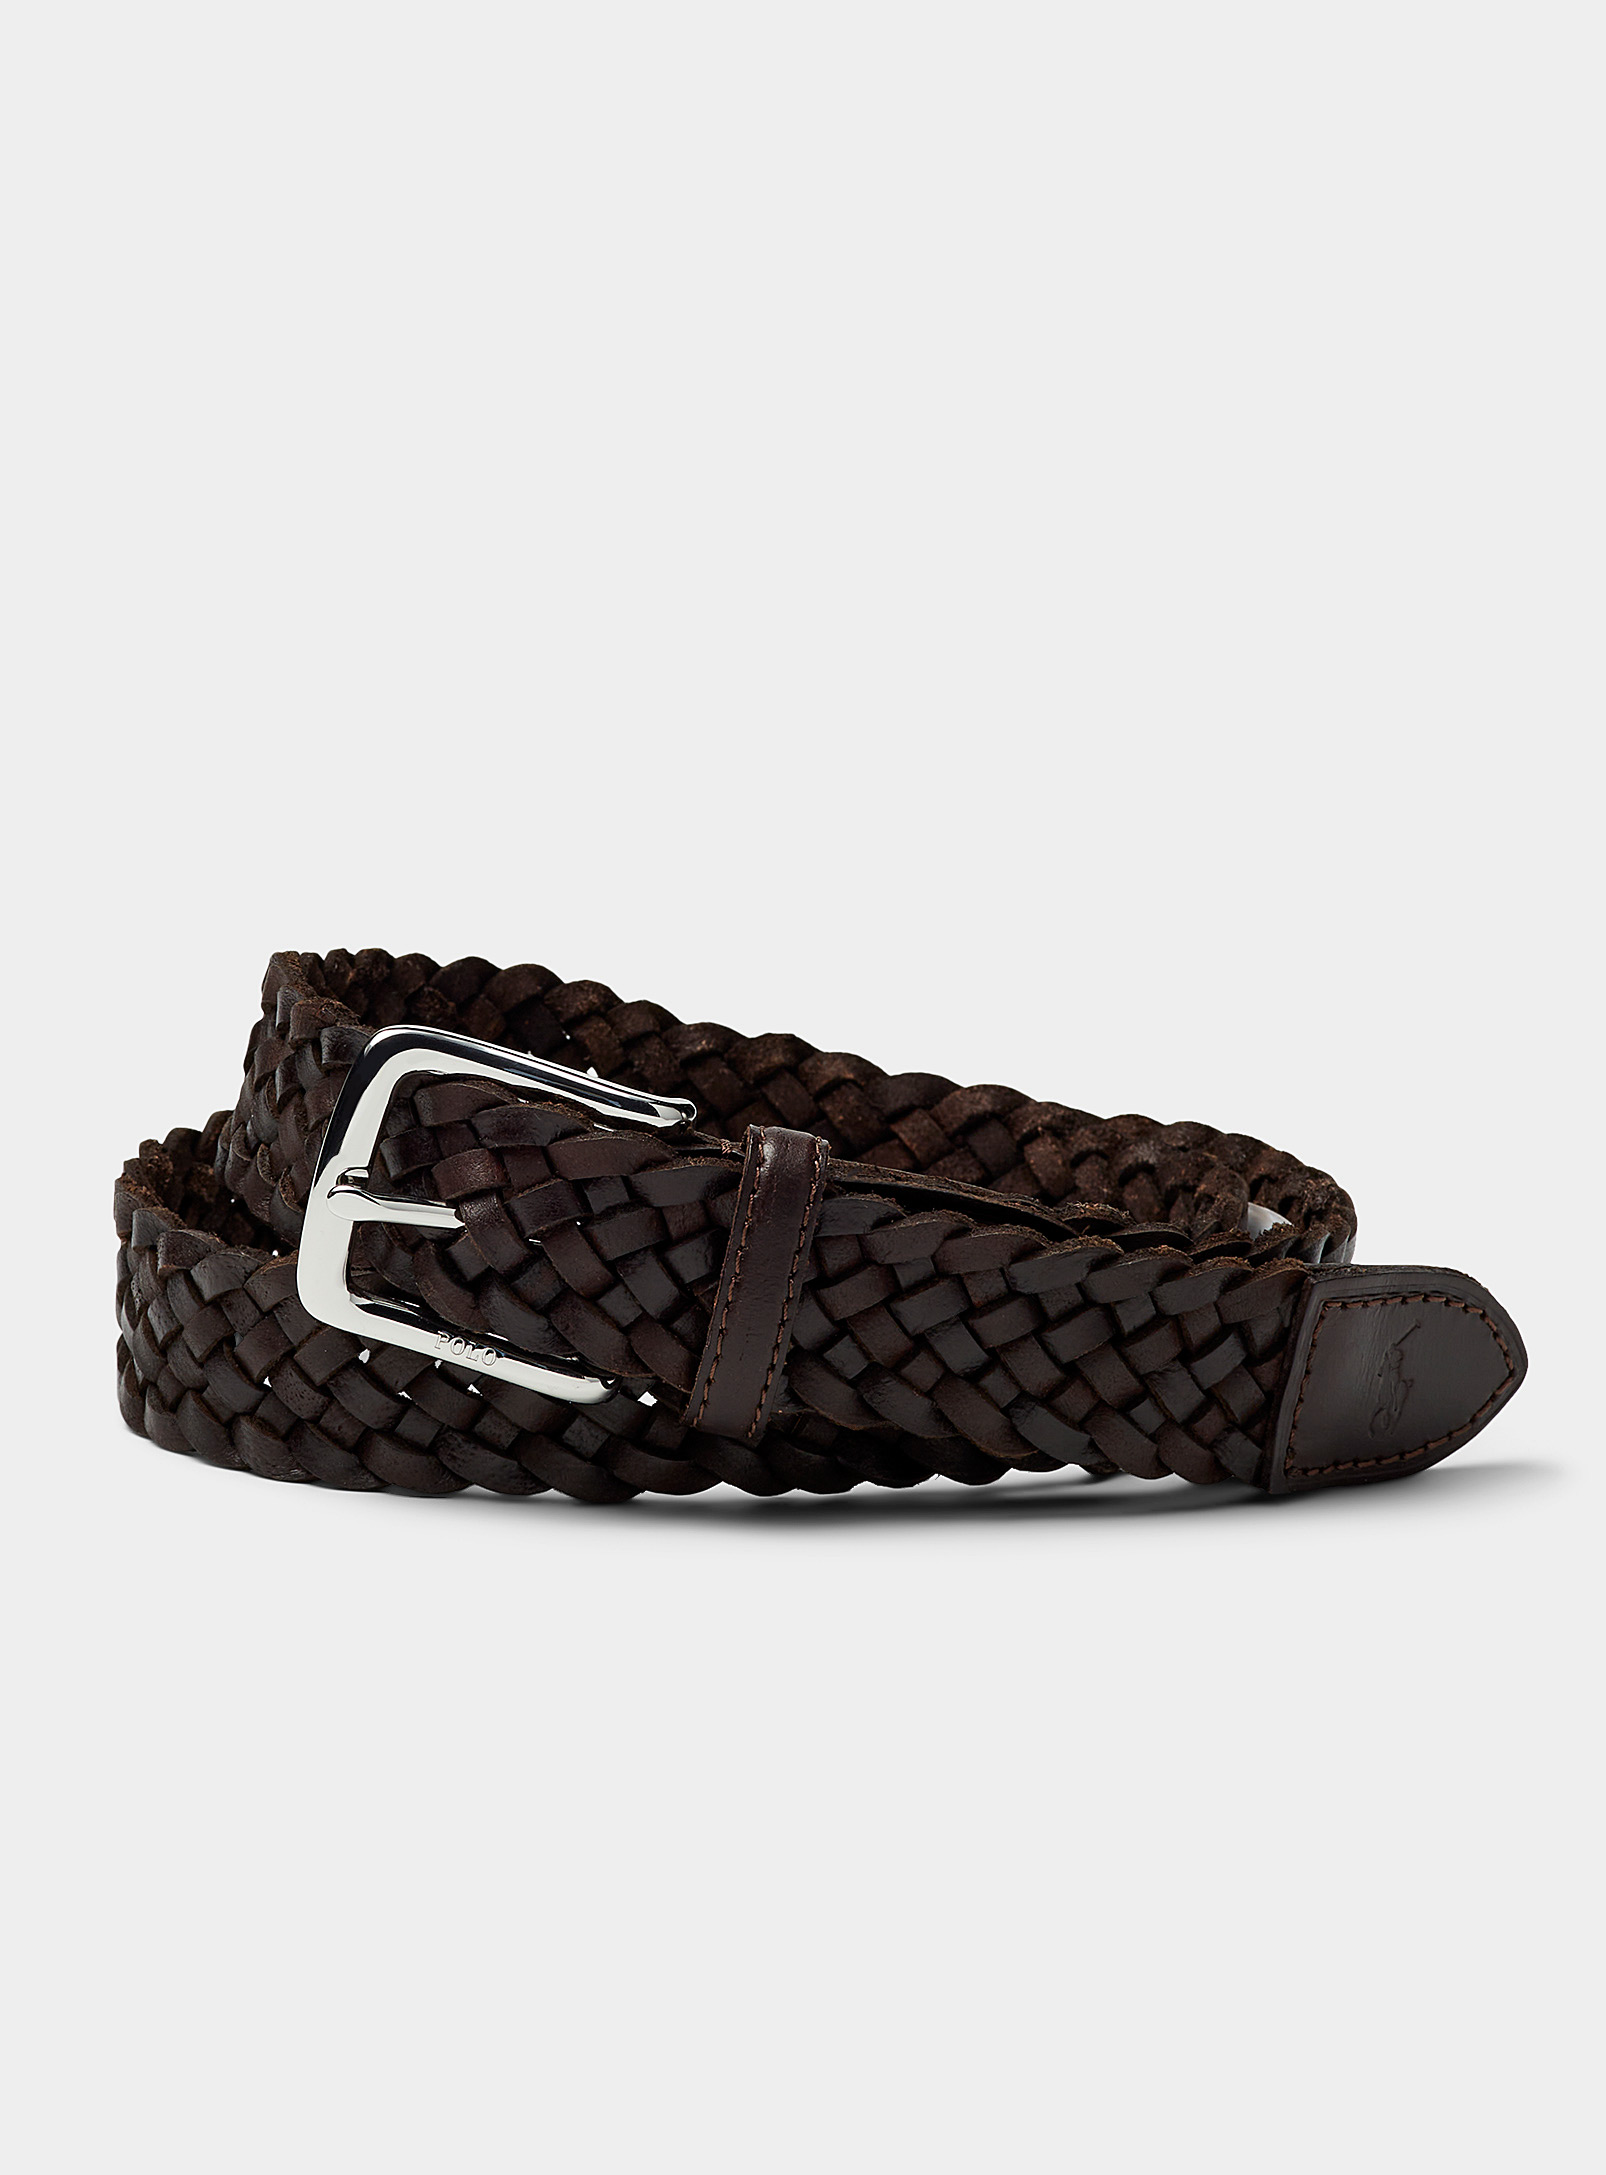 Polo Ralph Lauren Braided Leather Belt In Brown